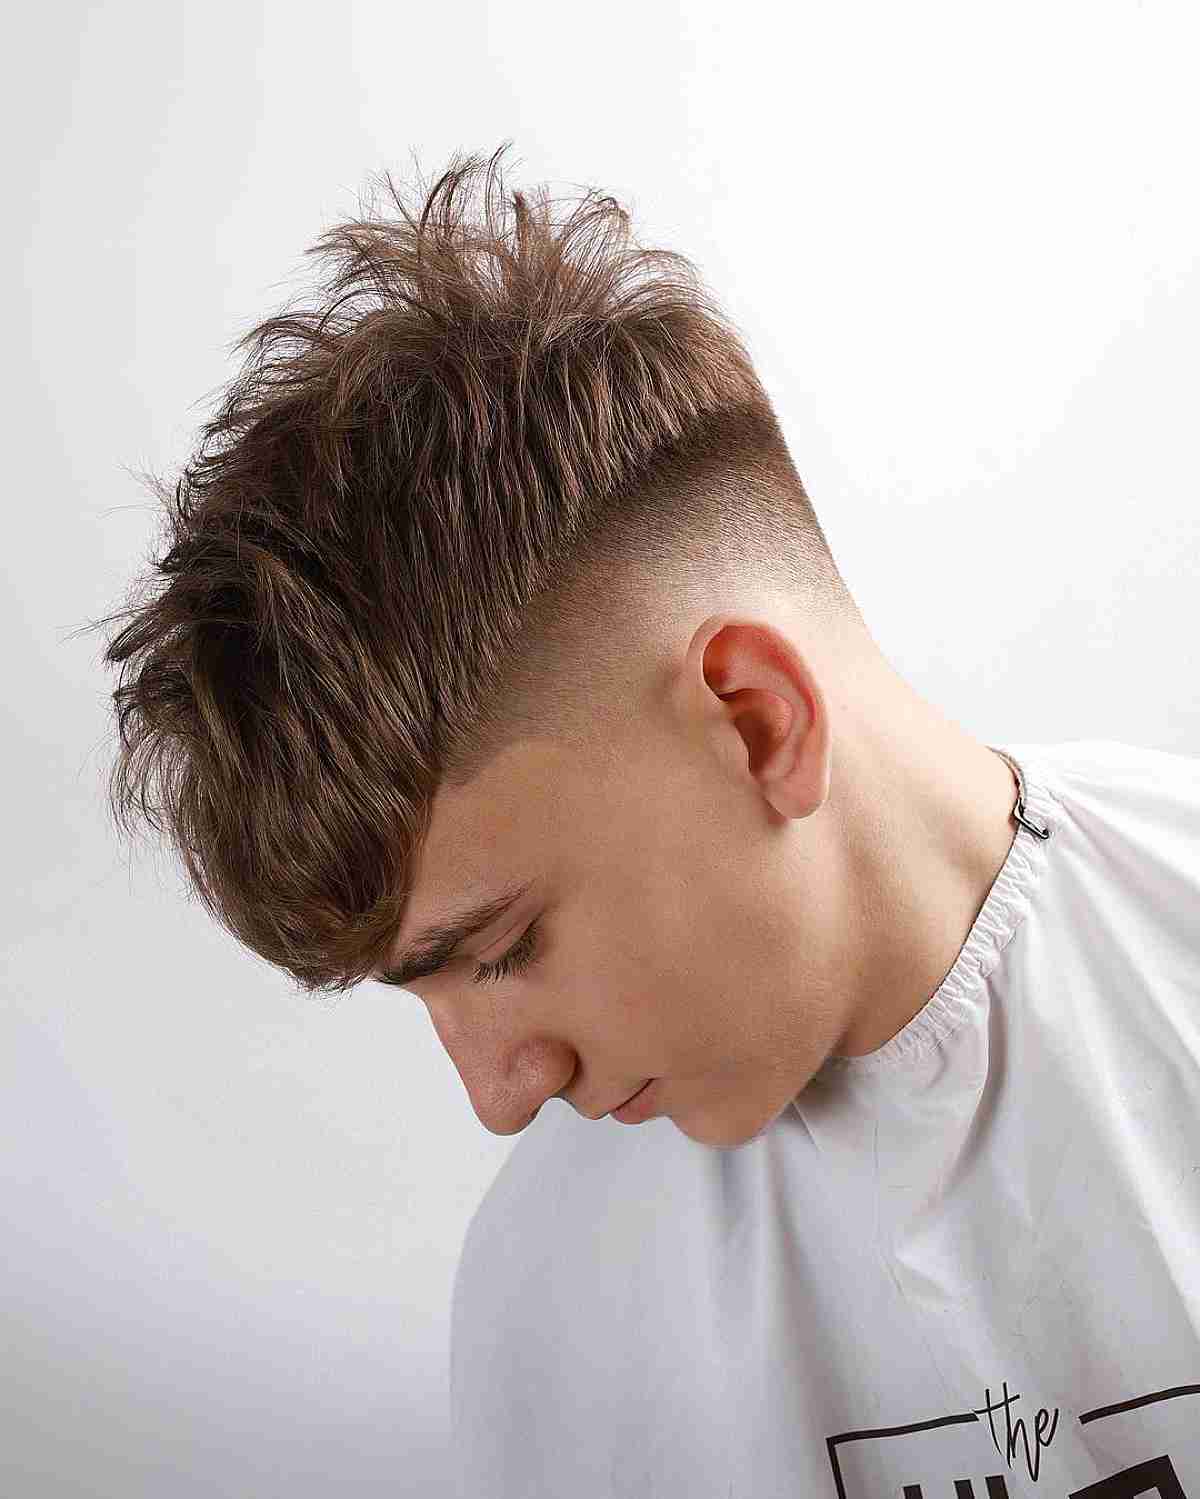 The Best Mens Haircut in 2023 For Any Hair Type  From The Experts